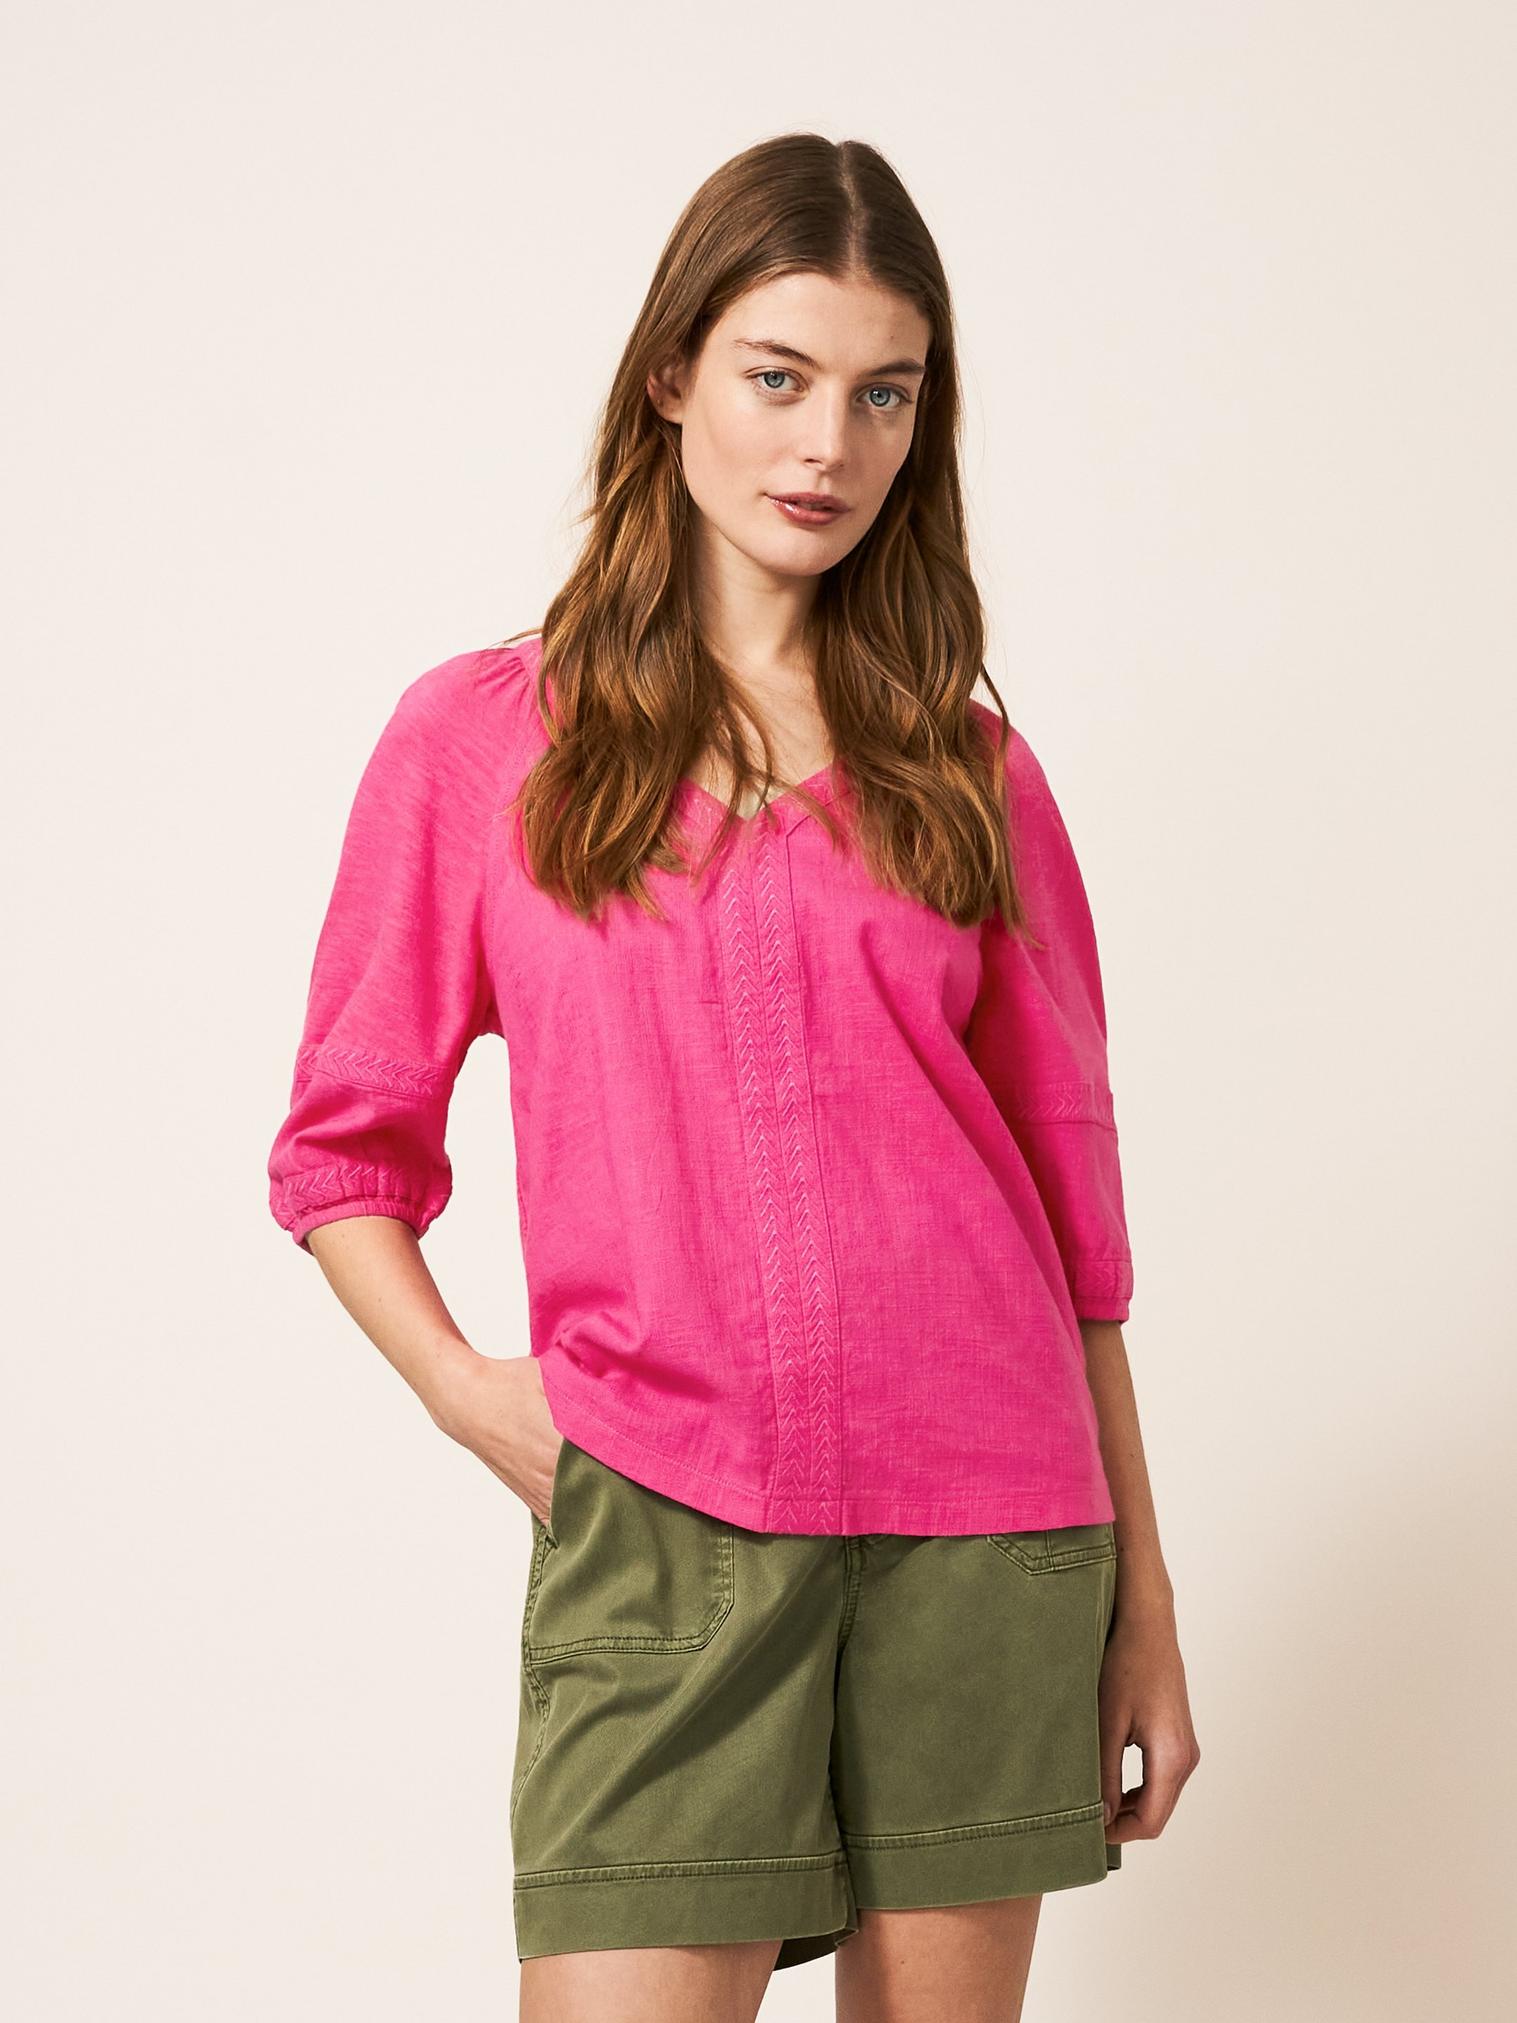 PHOEBE JERSEY MIX TOP in BRT PINK - LIFESTYLE